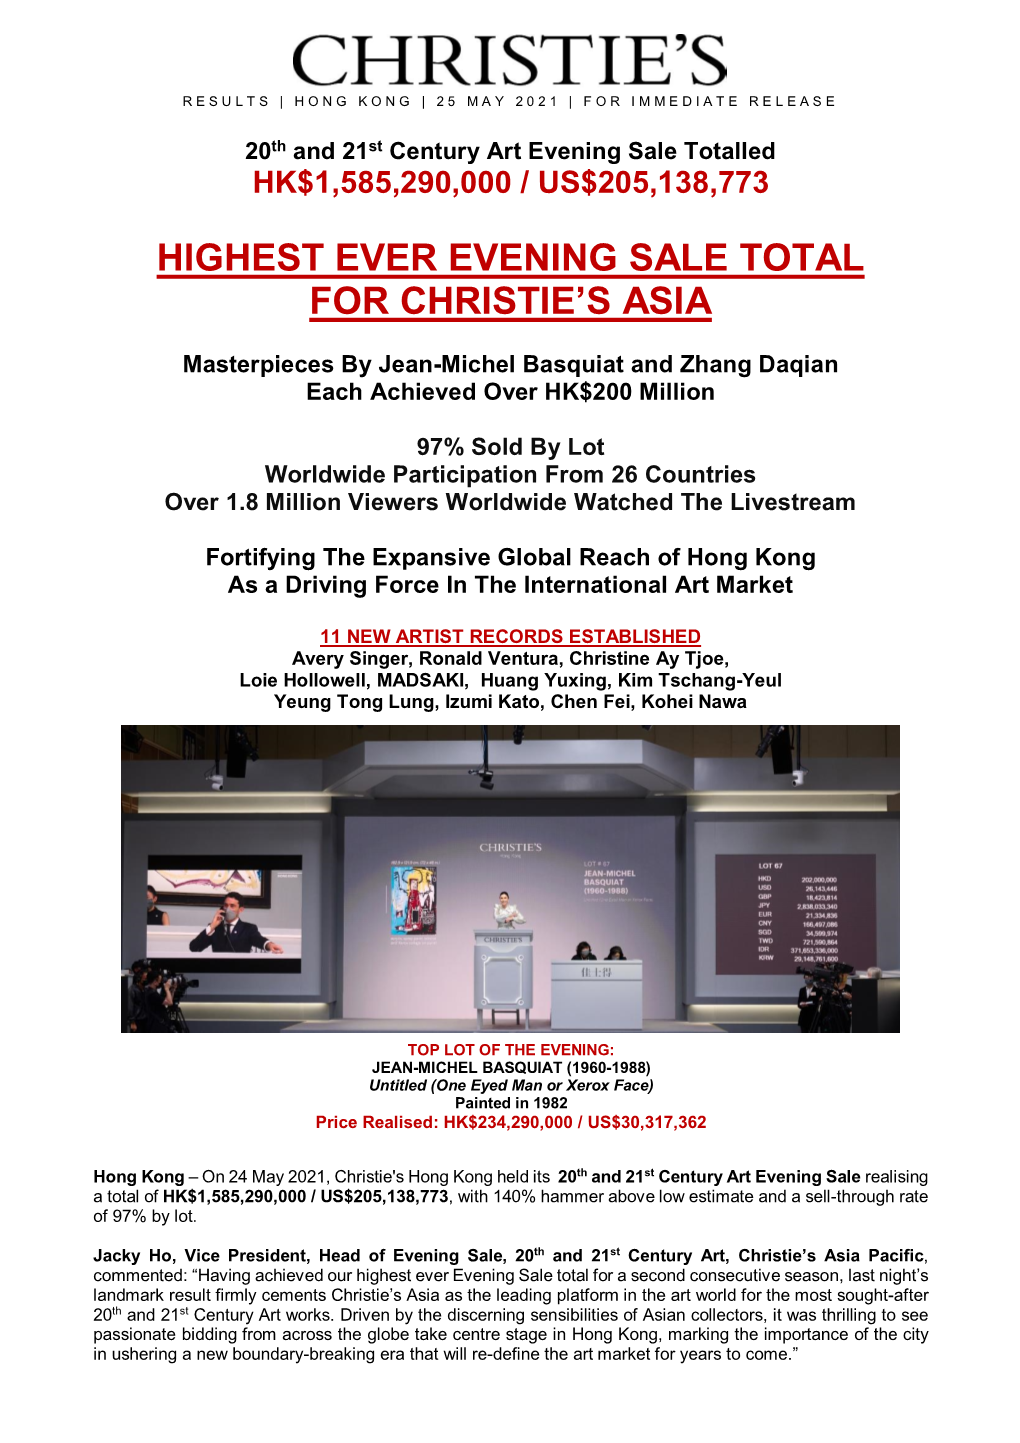 Highest Ever Evening Sale Total for Christie's Asia